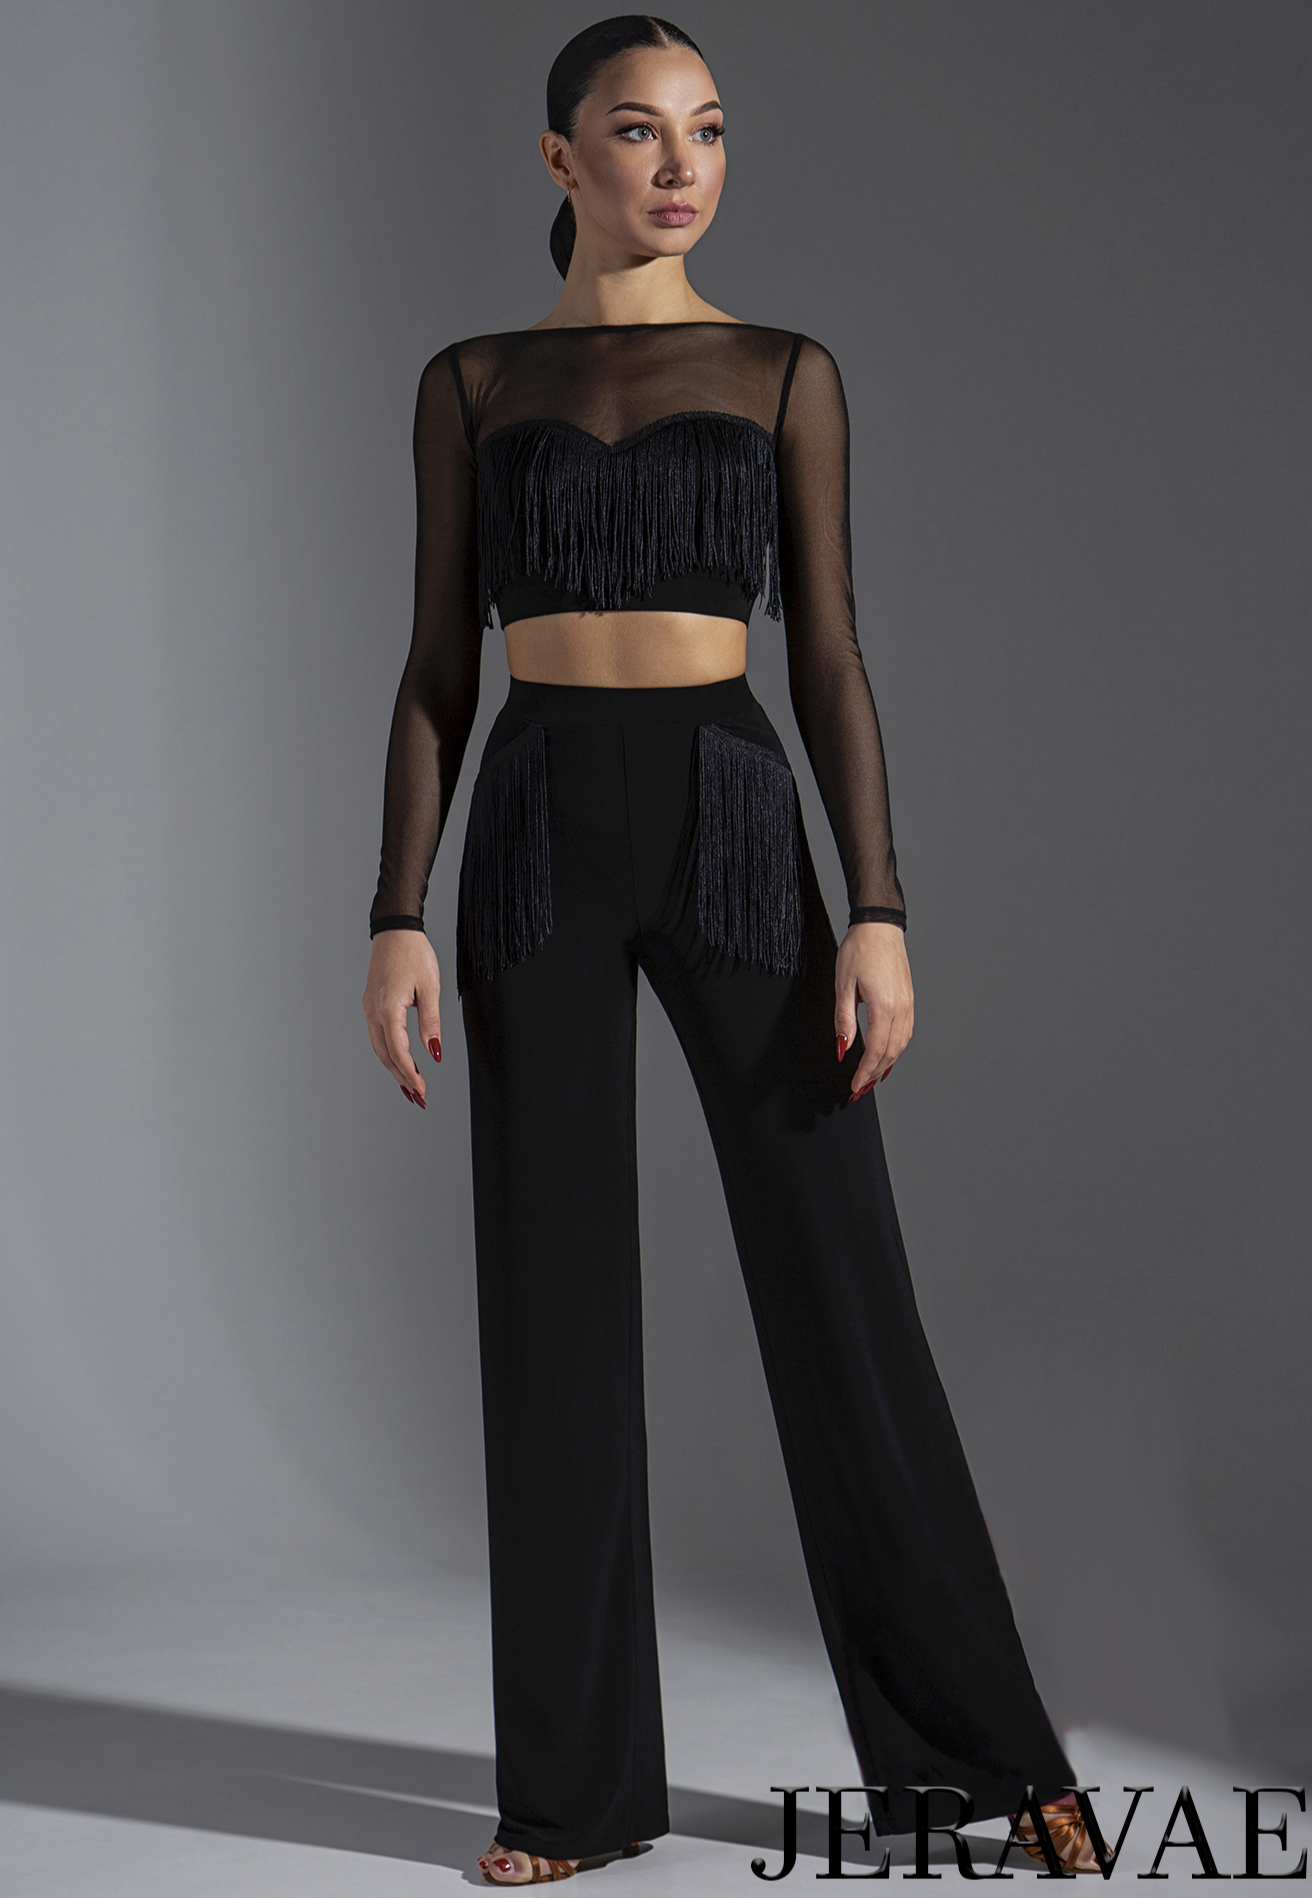 Black Practice or Teaching Dance Pants with Fringe Accents on Front PRA 579_sale